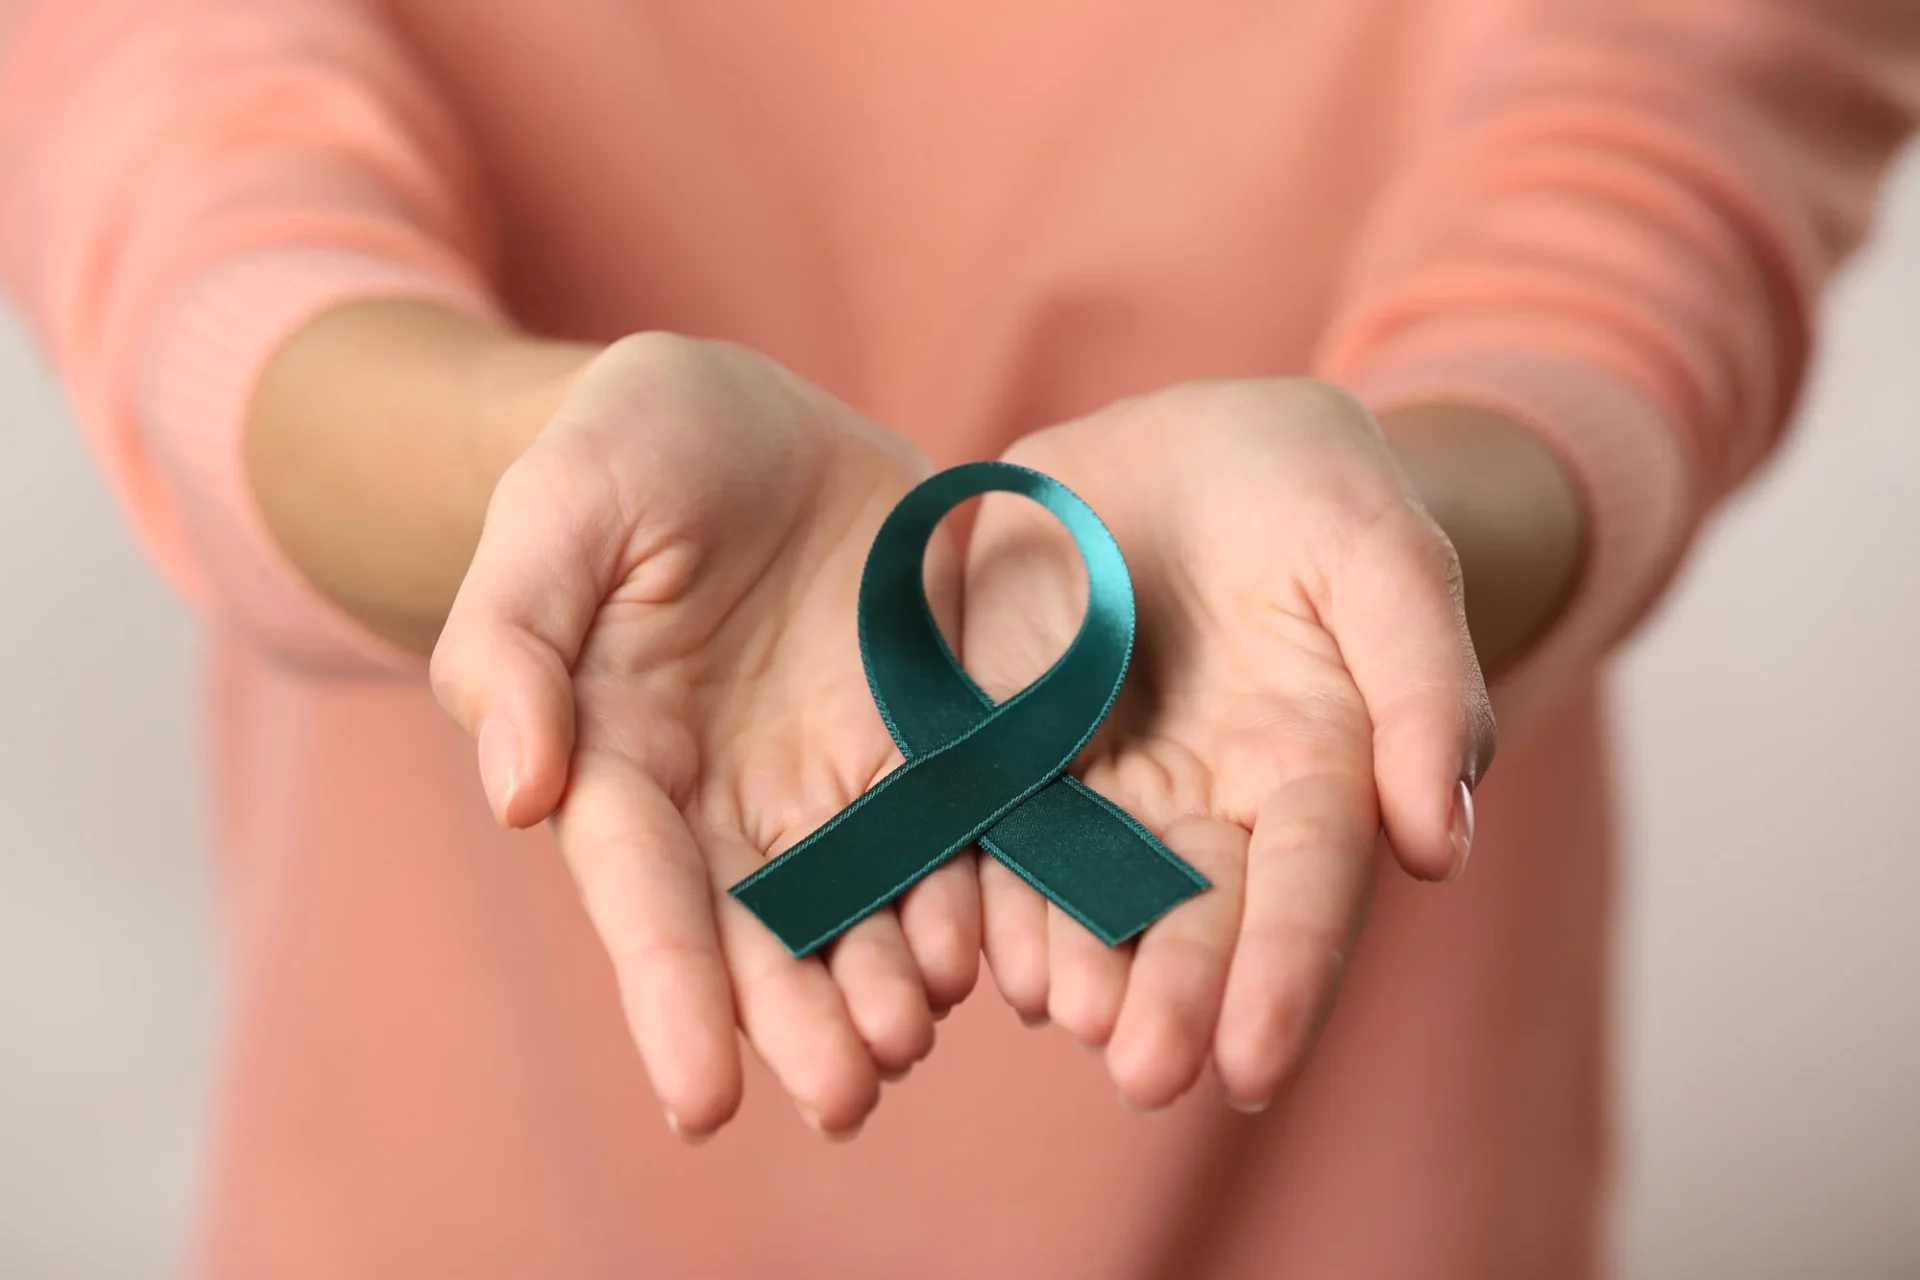 Scientists discover professions with greater risk of Ovarian Cancer - Asiana Times